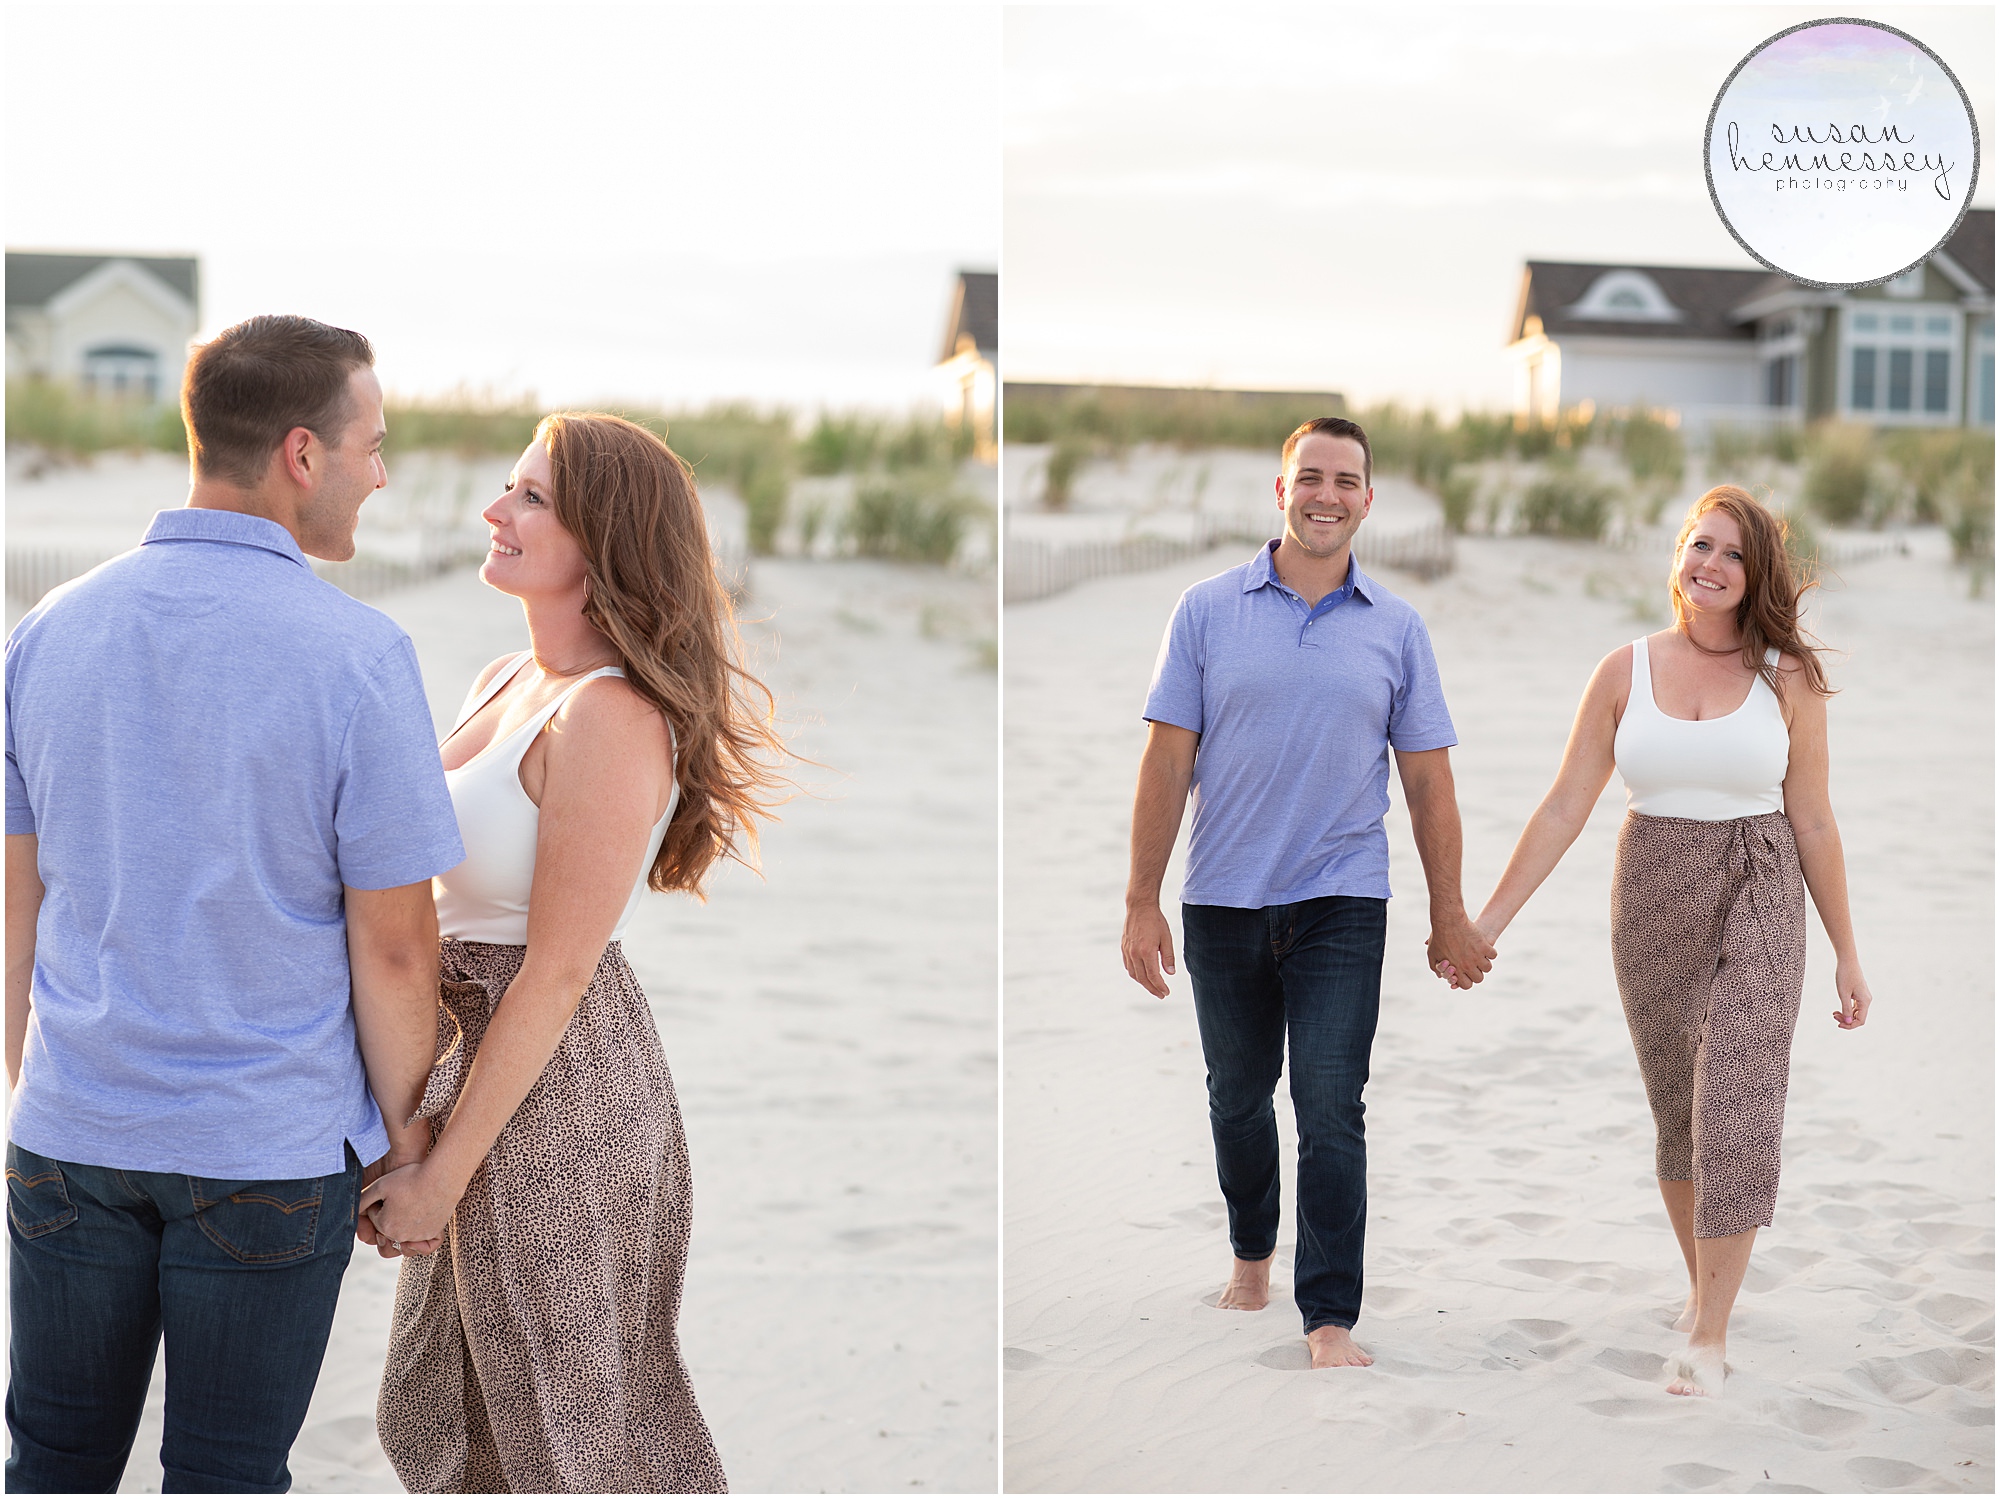 Romantic portraits of newly engaged couple after the surprise proposal.